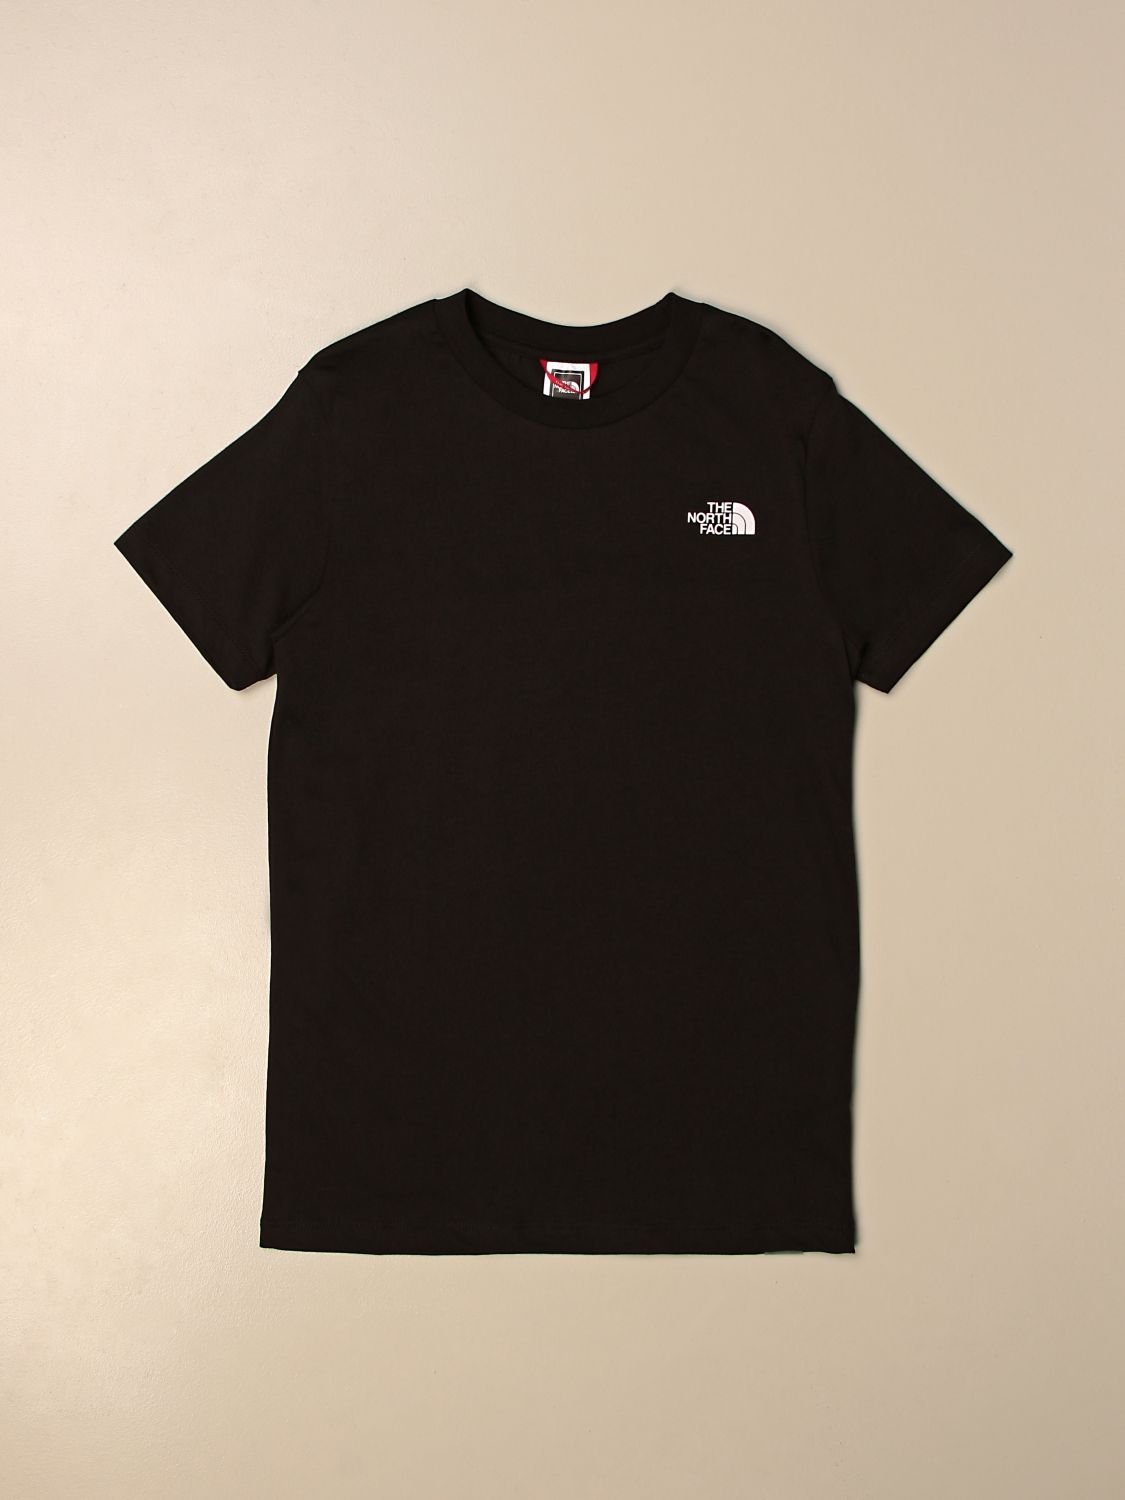 children's north face t shirts